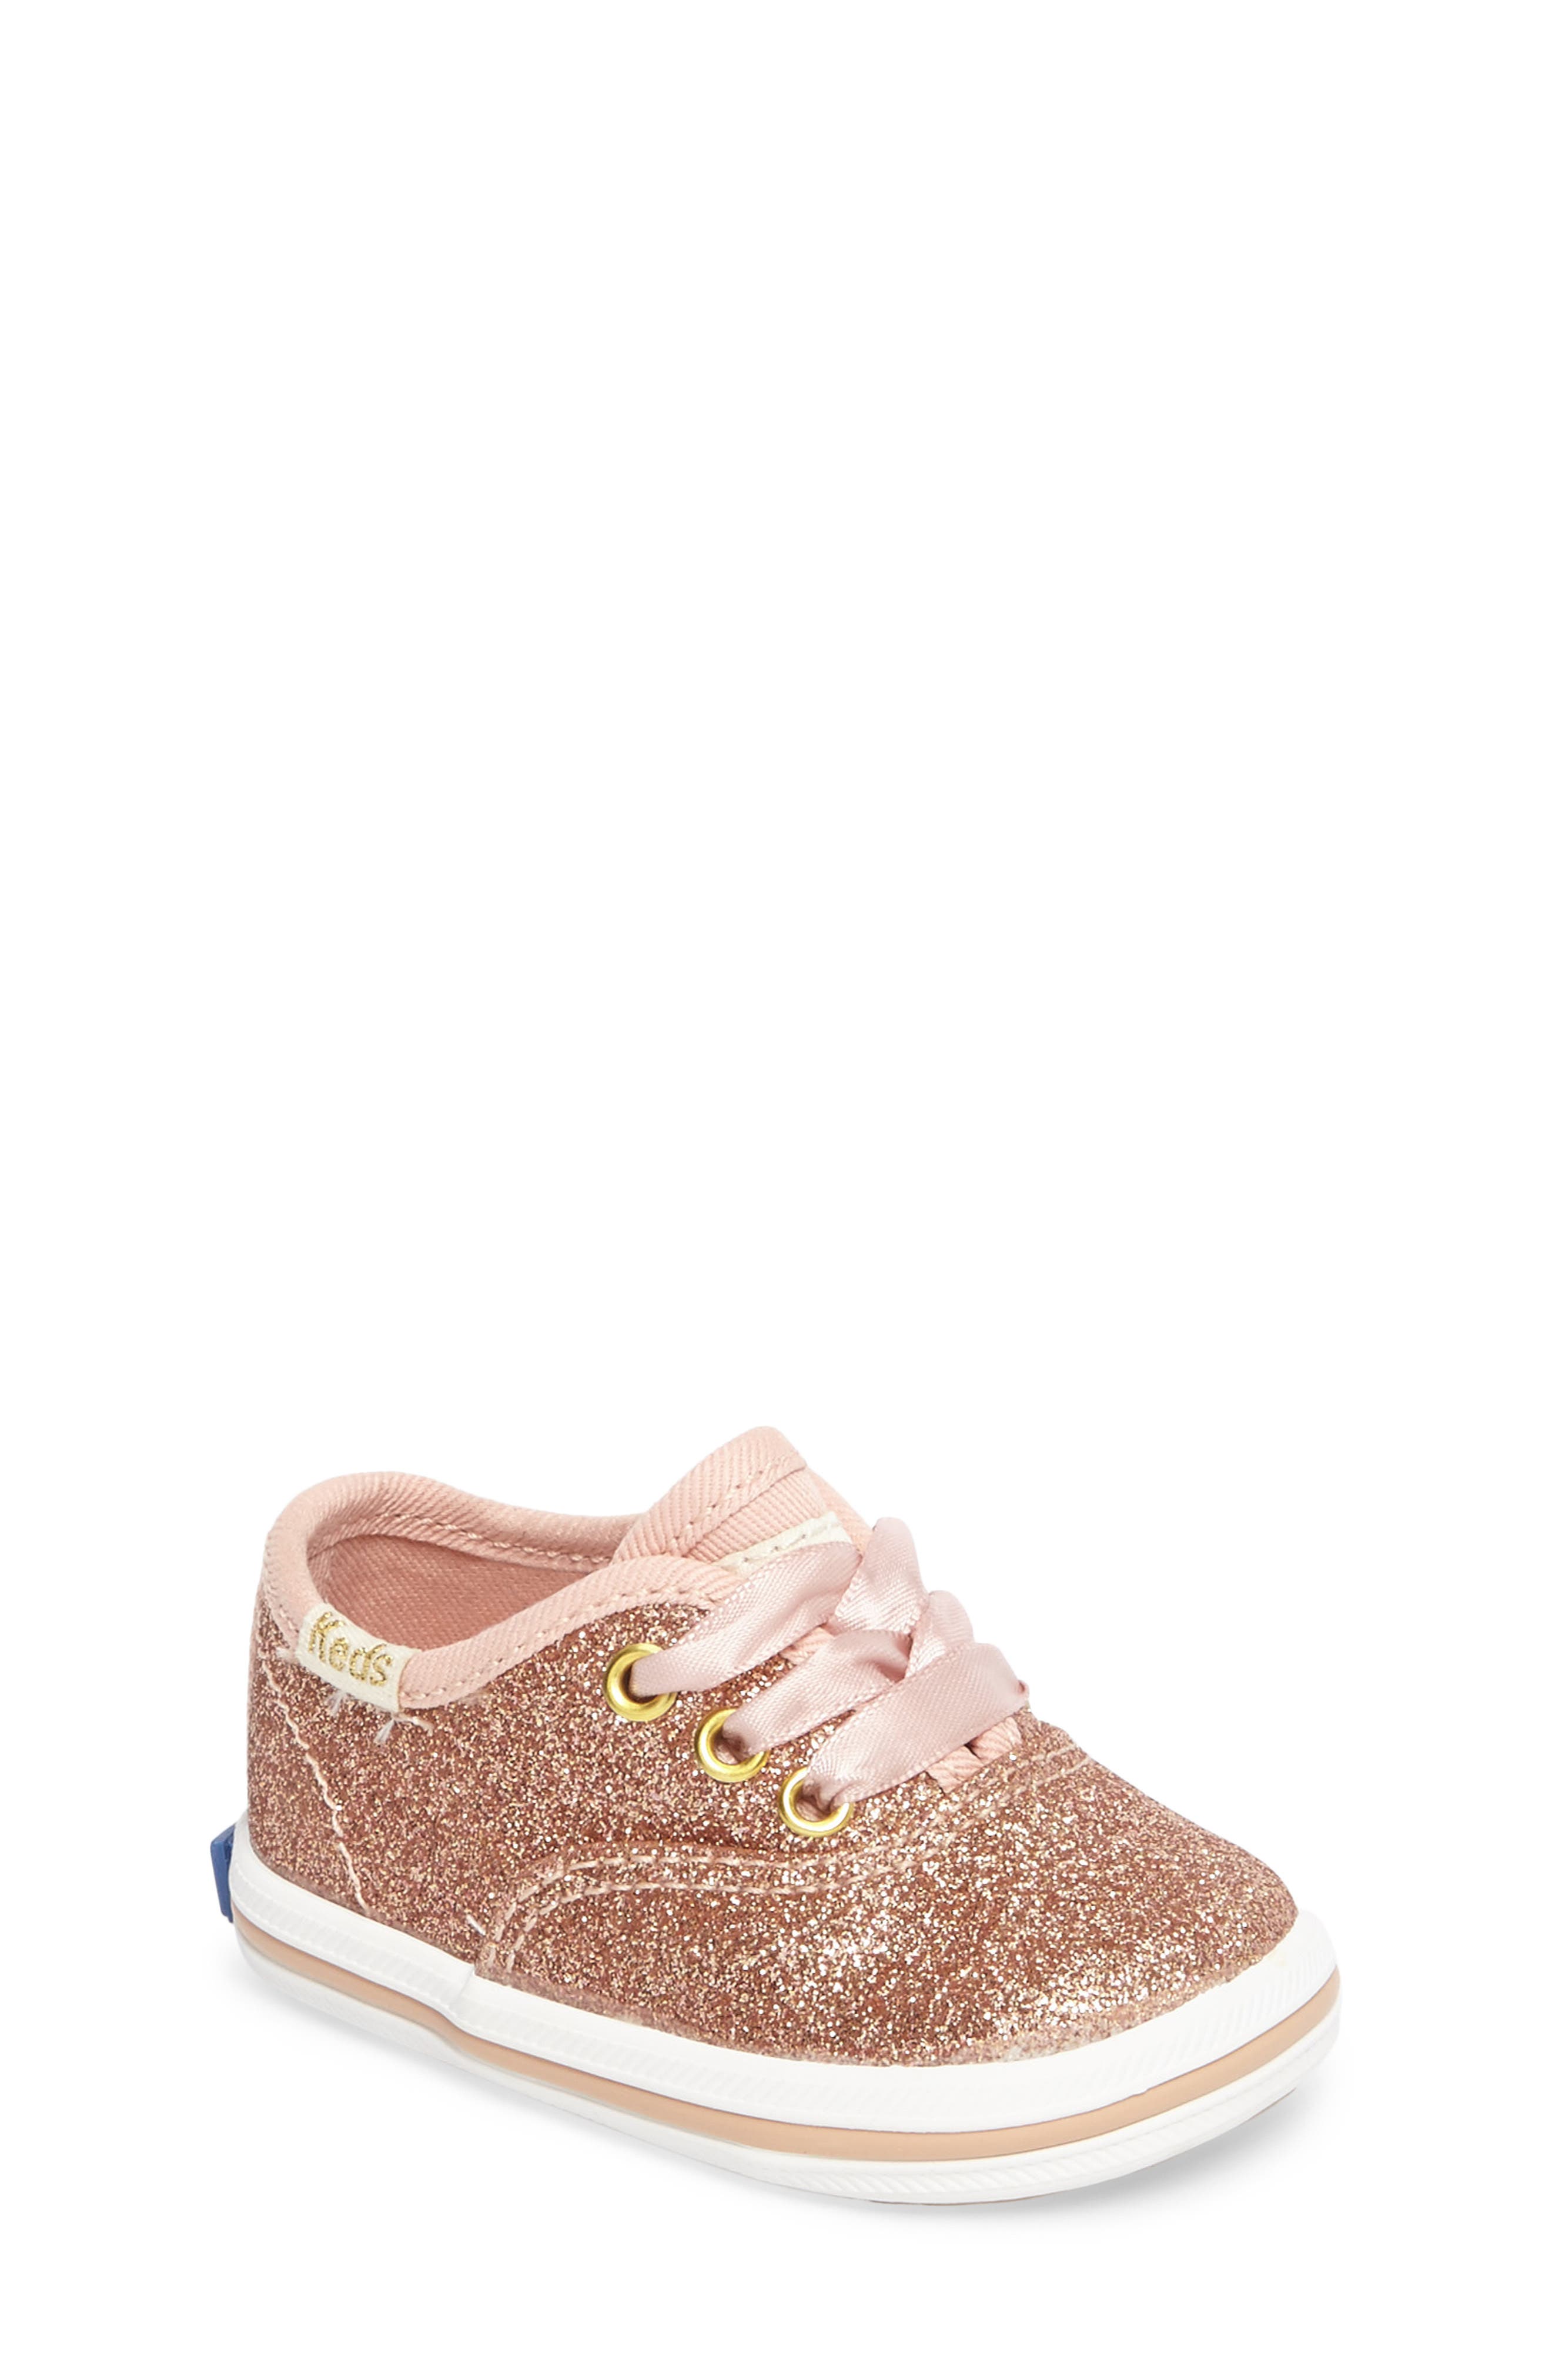 UPC 884401127258 product image for Keds(R) x kate spade new york Champion Glitter Crib Shoe in Rose Gold at  | upcitemdb.com